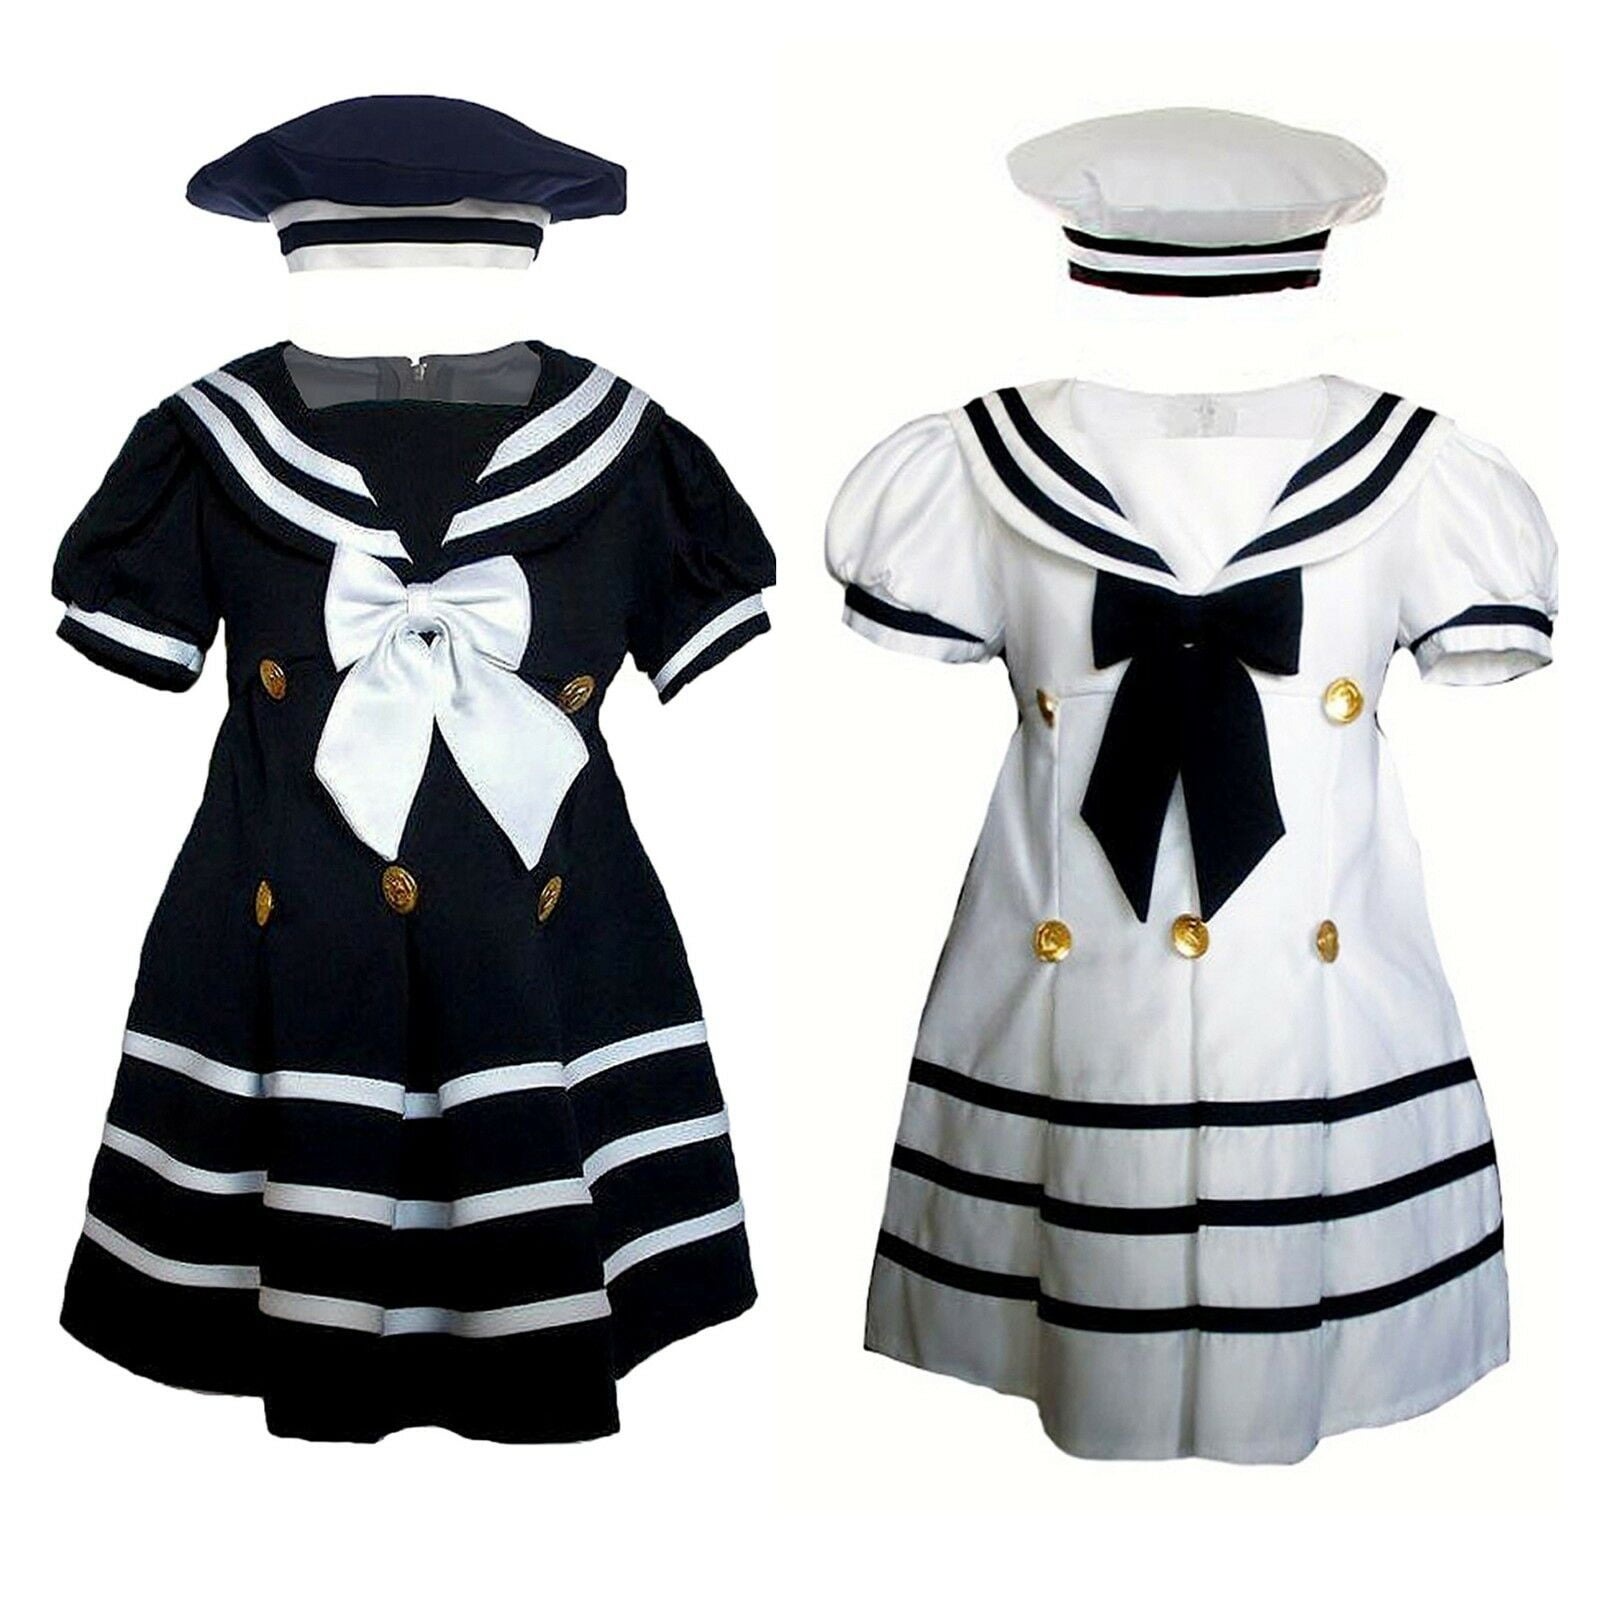 Baby Girl Toddler Formal Nautical Sailor Dress Navy Blue with Hat Size:24M 4T 